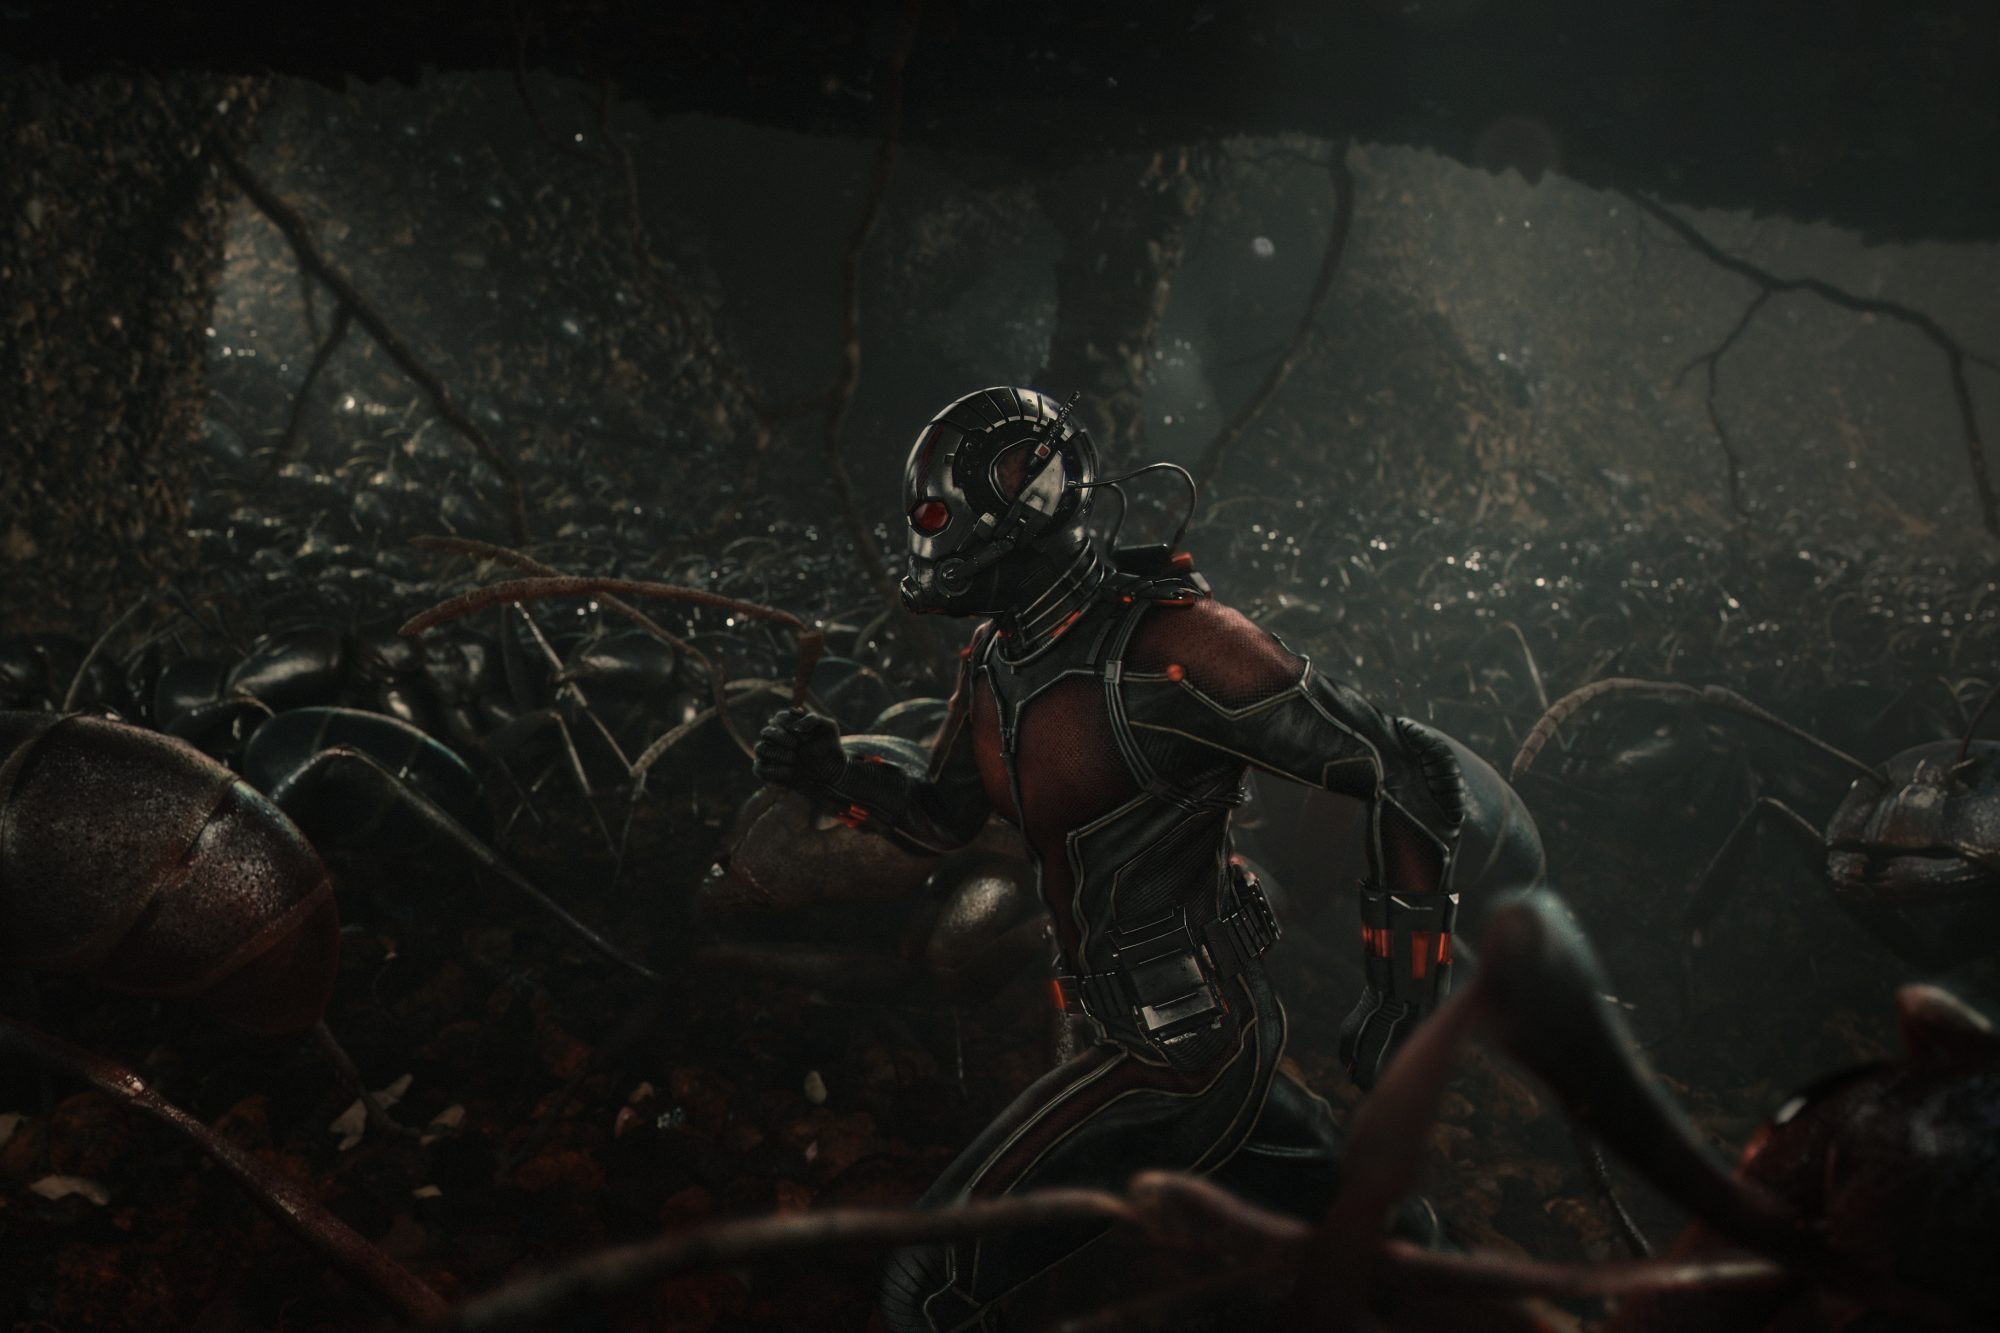 Ant Man Running With Ants 4k Uhd Wallpaper